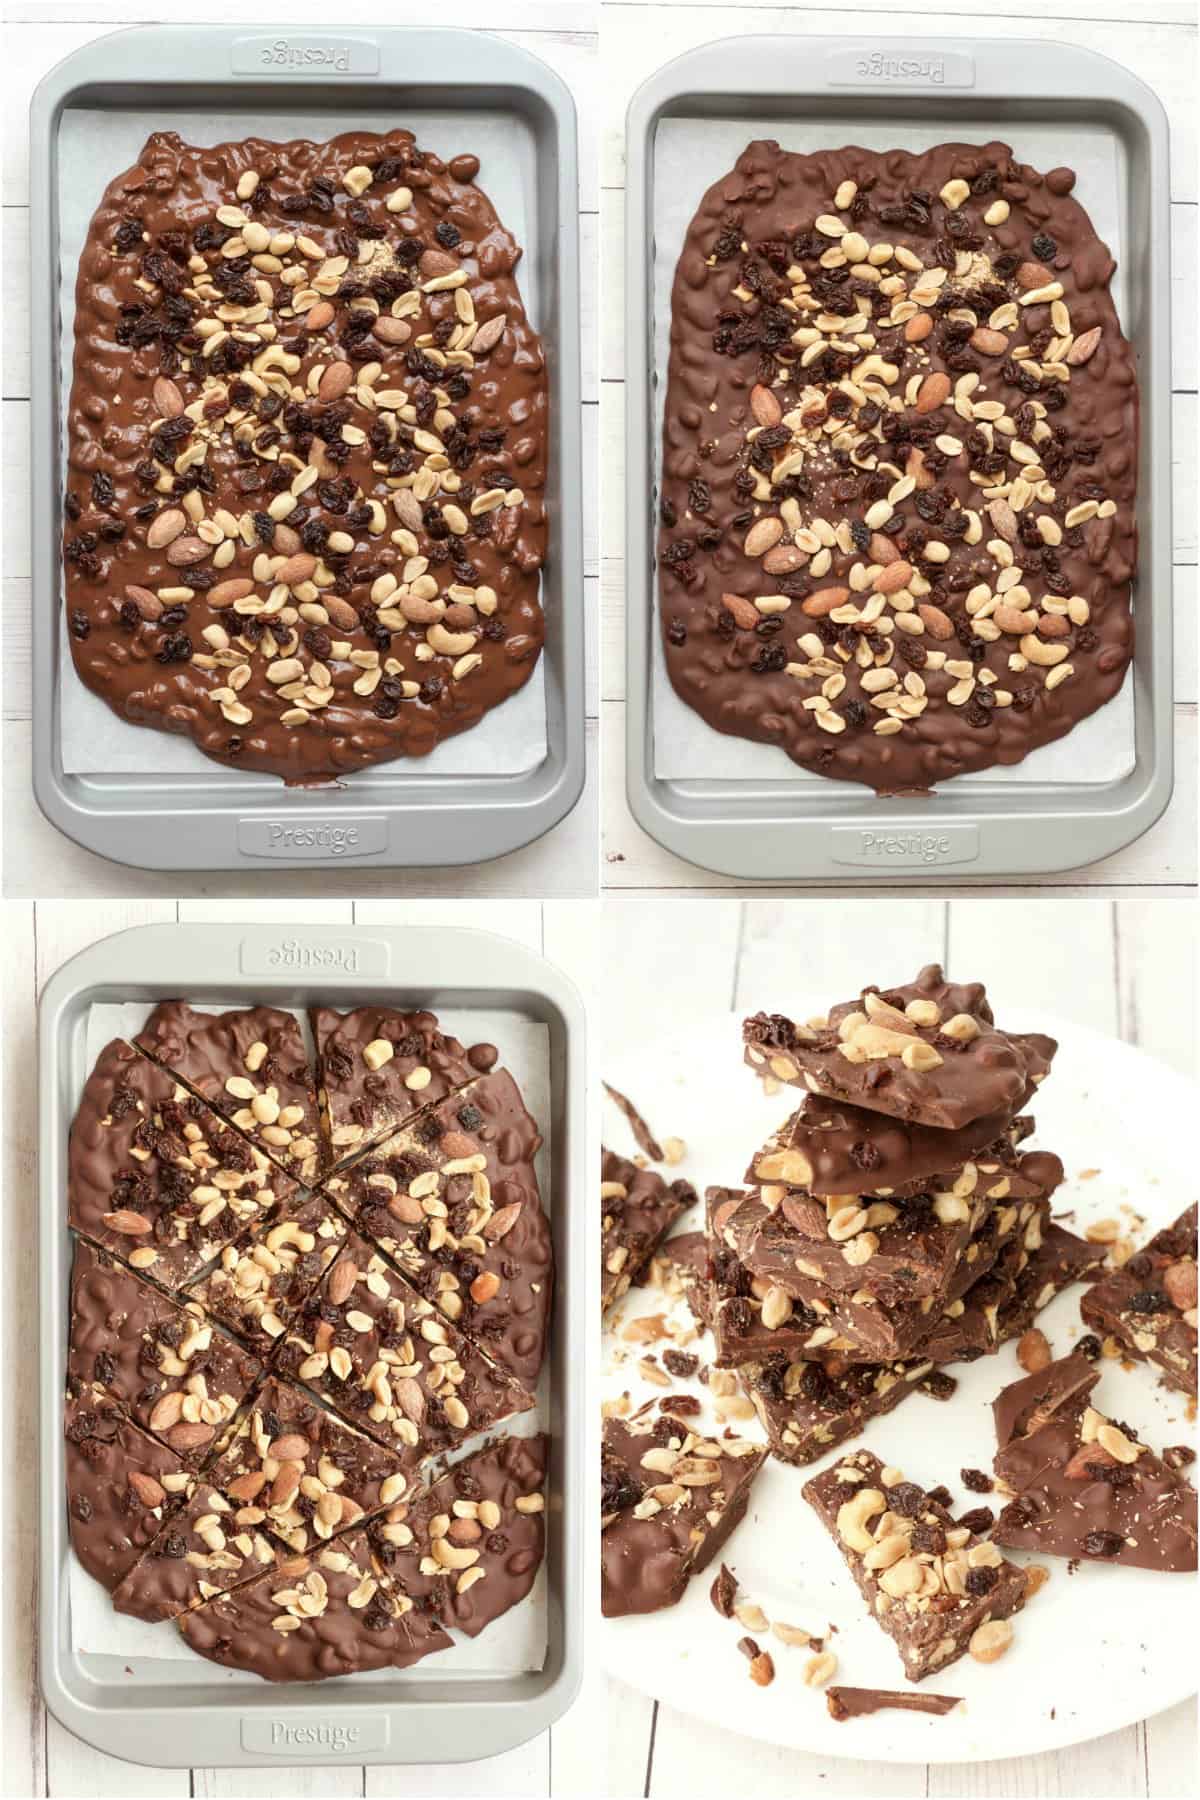 Step by step process photo collage of making vegan chocolate bark.